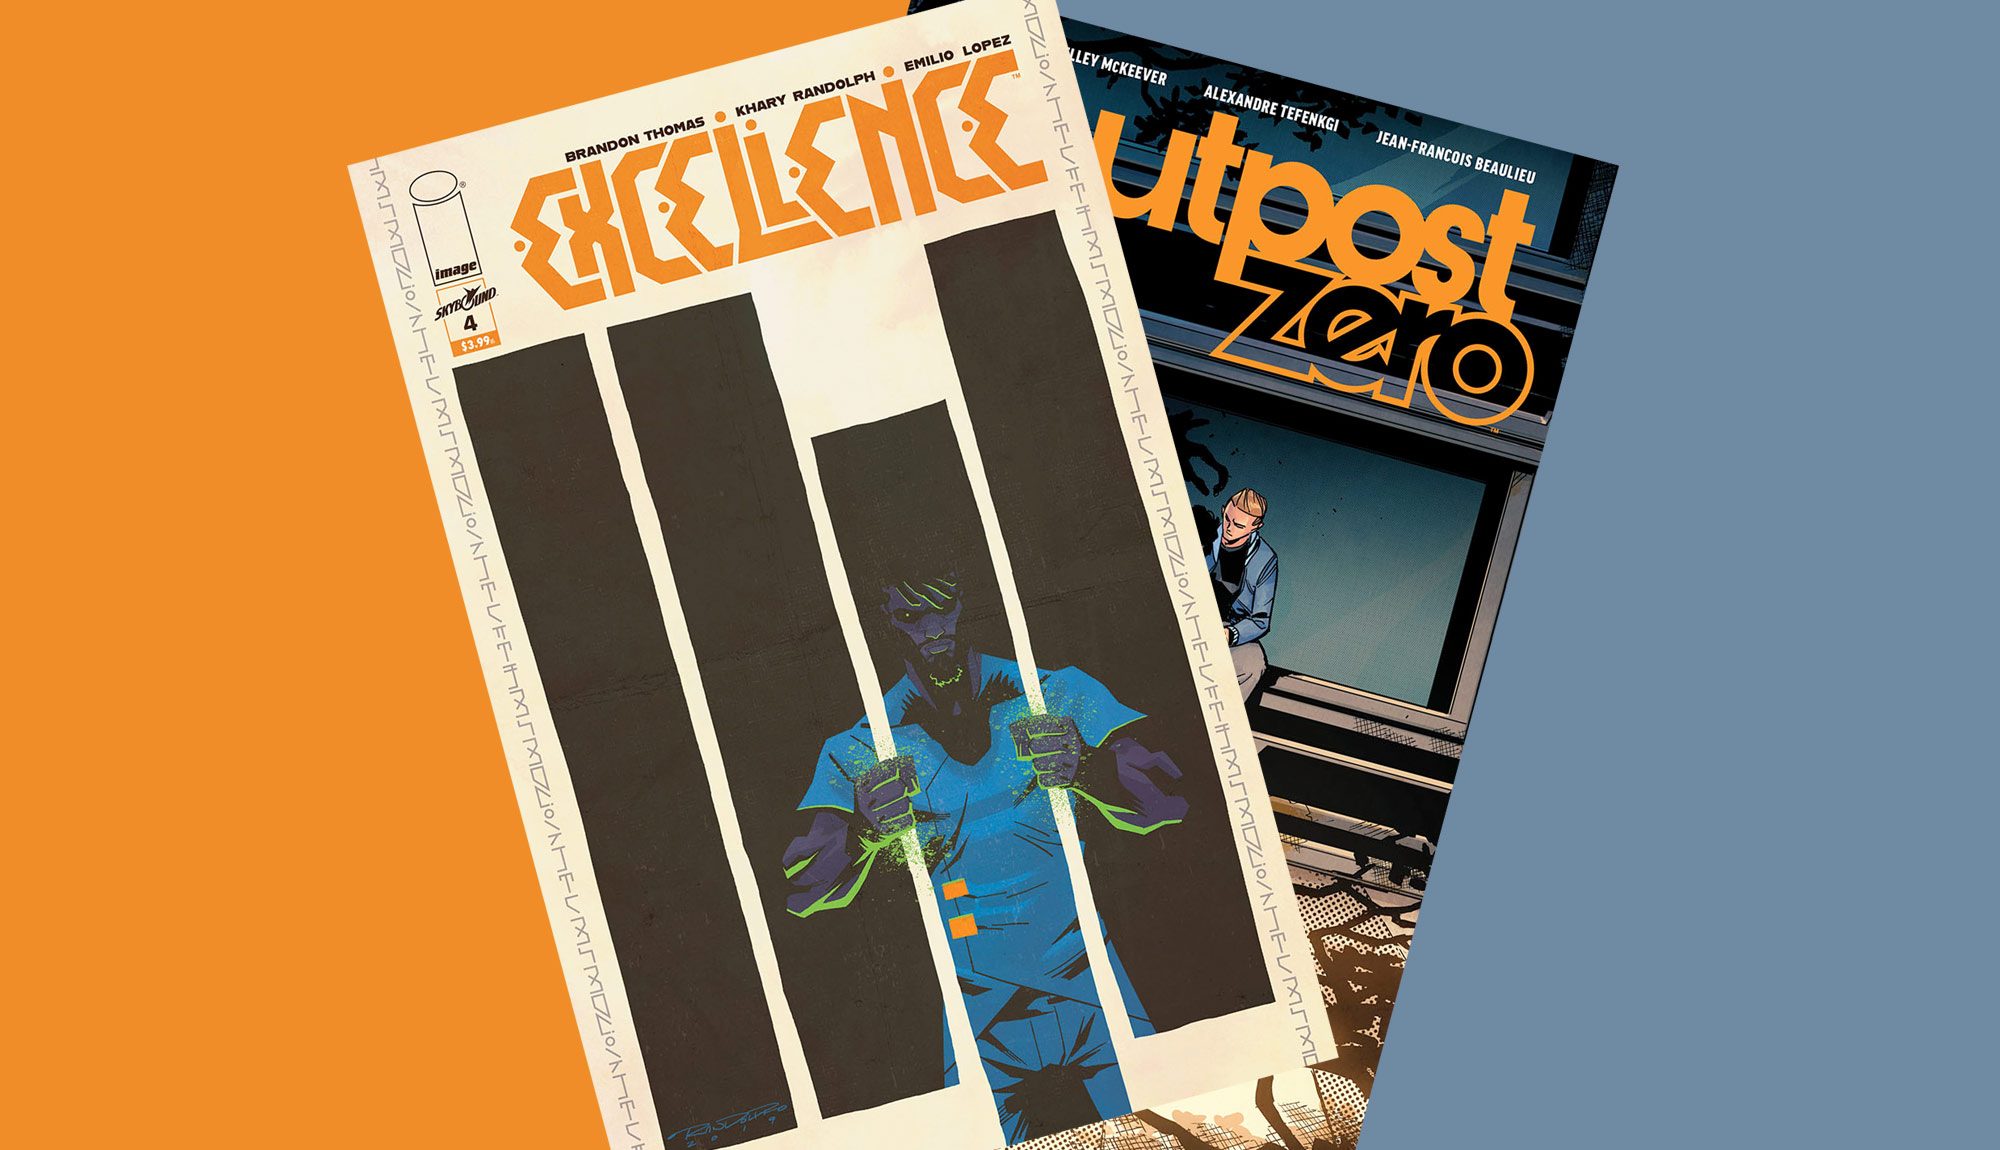 This Week’s Comics: EXCELLENCE & OUTPOST ZERO!